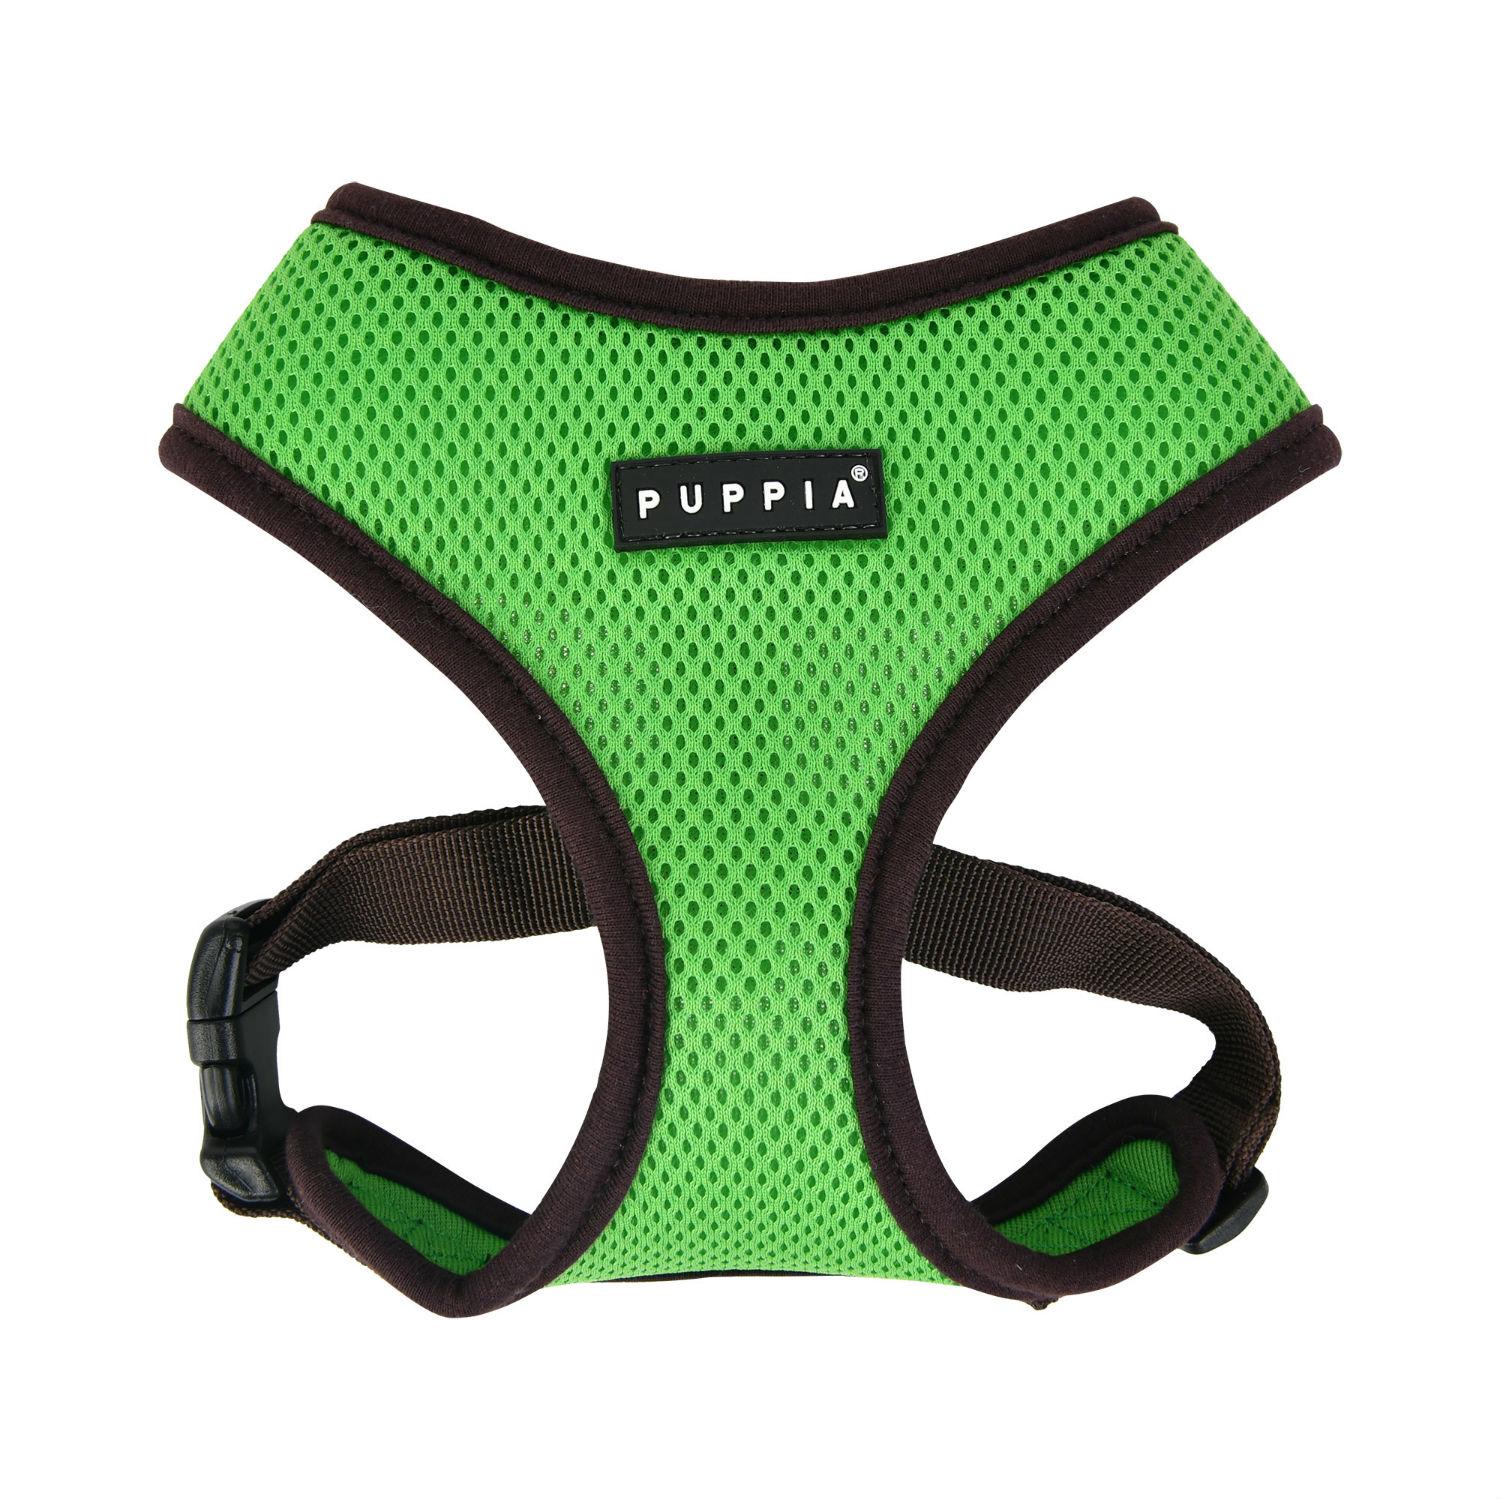 Soft Mesh Dog Harness by Puppia - Green